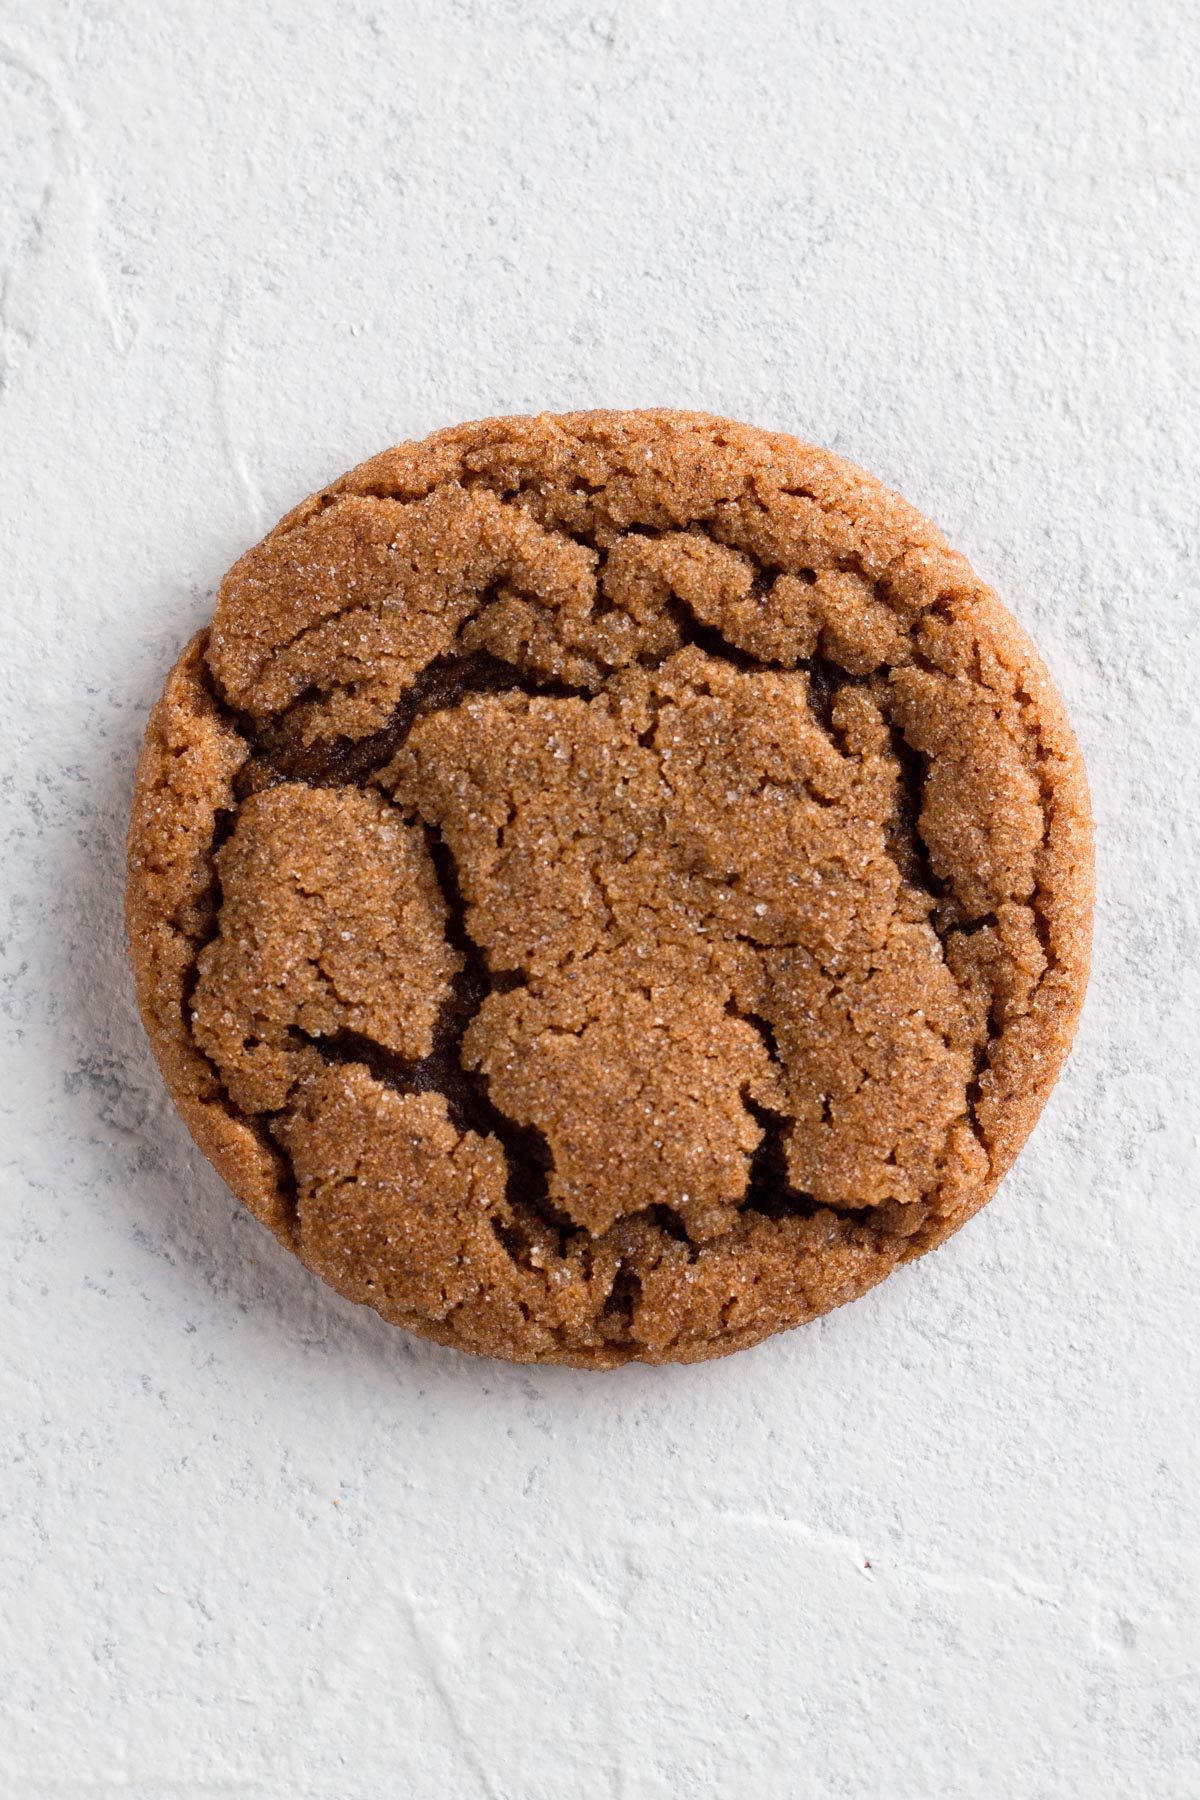 Close up overhead view of a molasses crinkle cookie on a white textured surface.